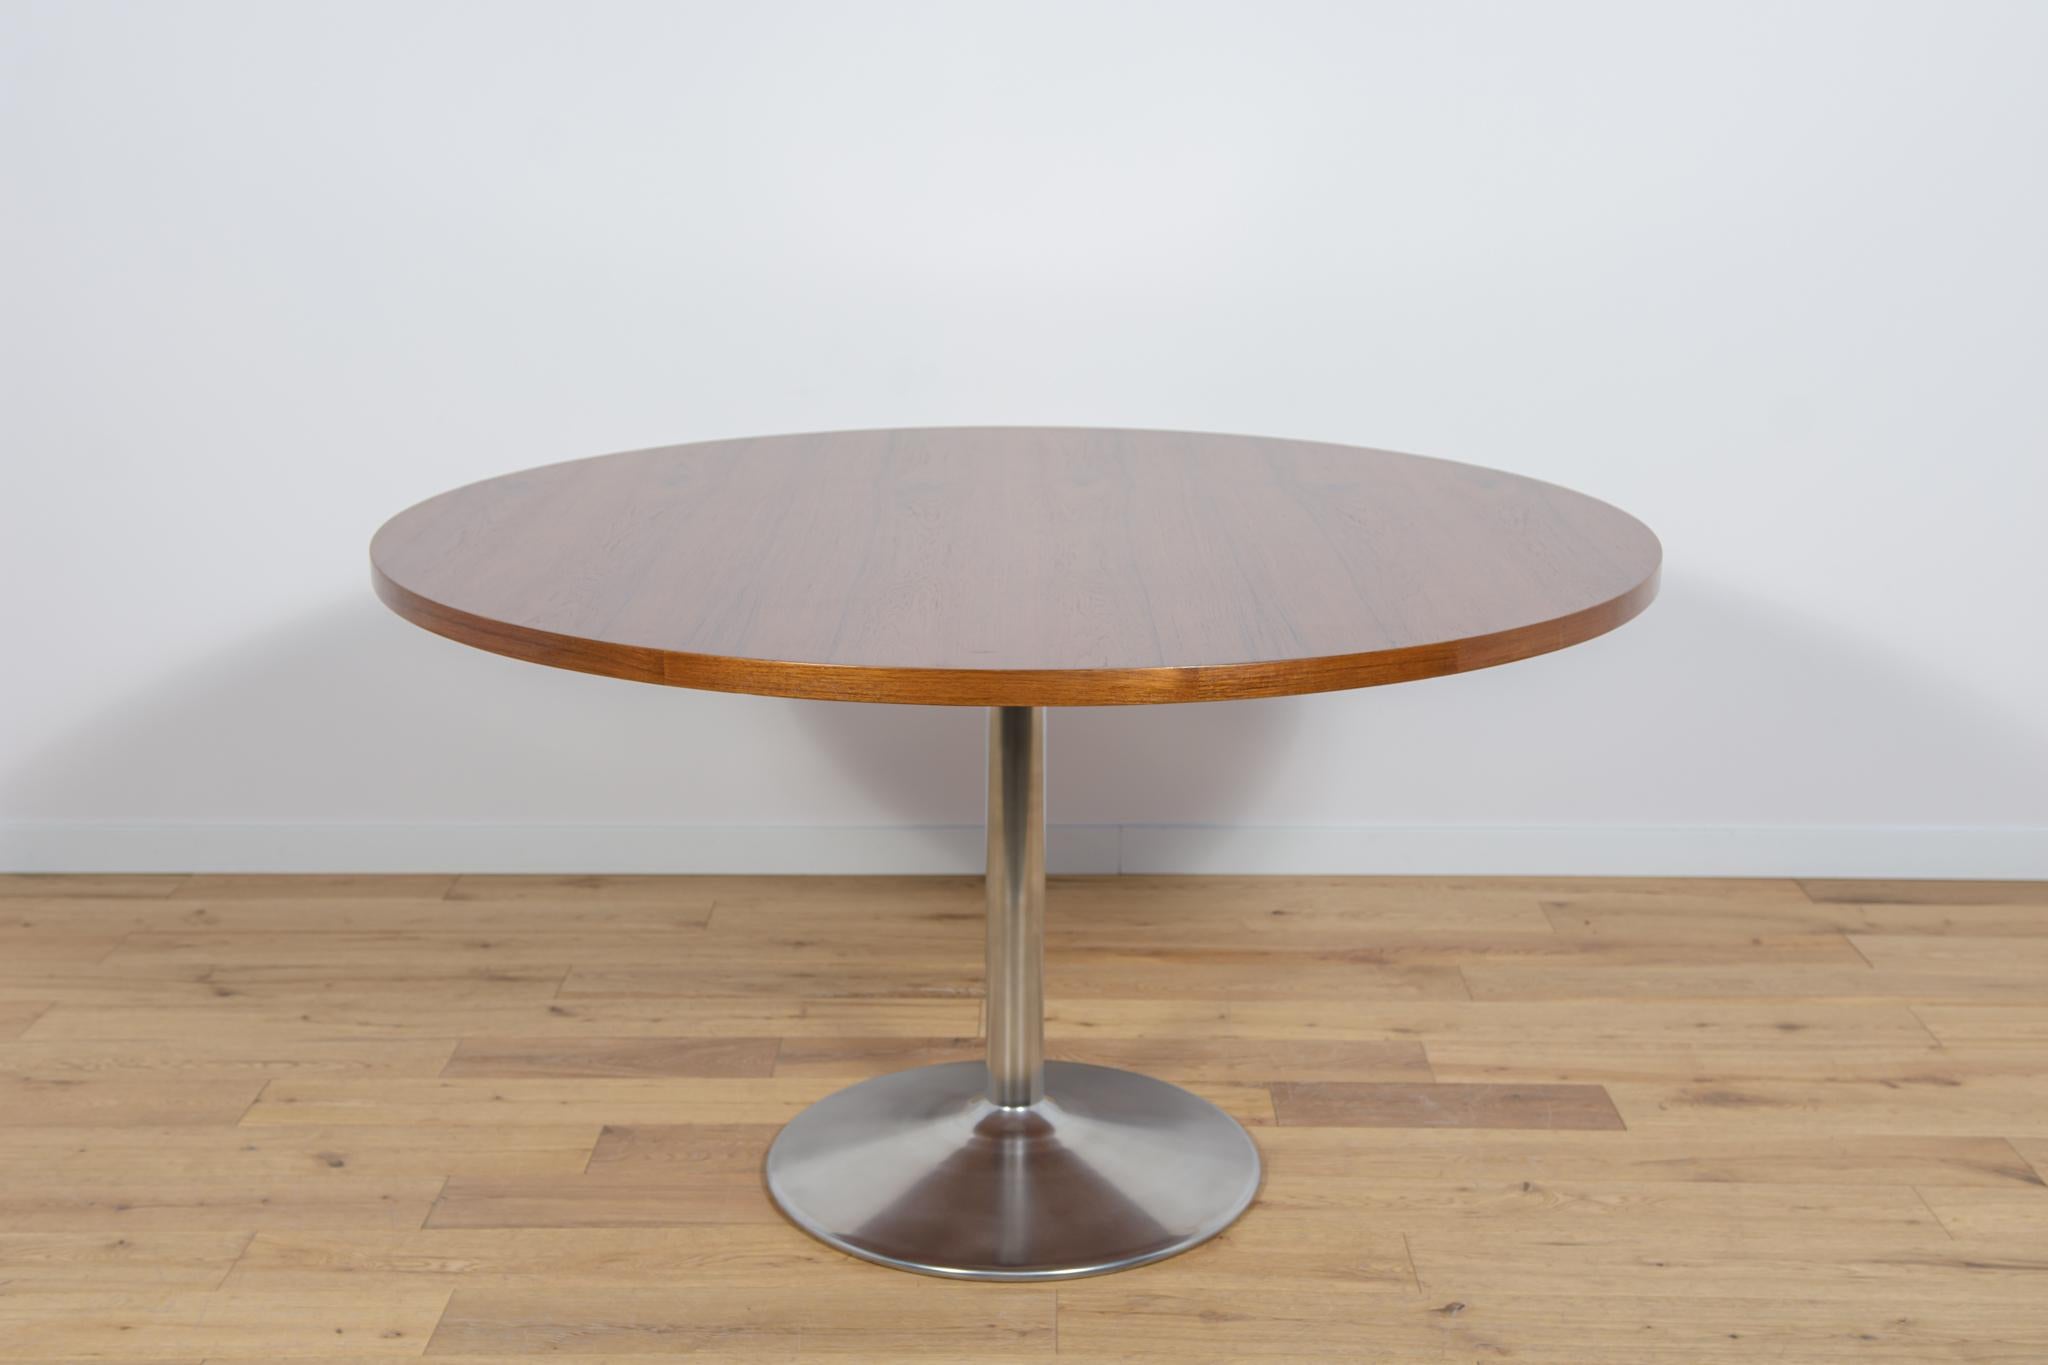 The table was produced in Denmark in the 1970s. Table top made of teak veneer. The furniture is after a comprehensive carpentry renovation, cleaned of the old coating, finished with high-quality Danish Oil. The table base is made of aluminum has